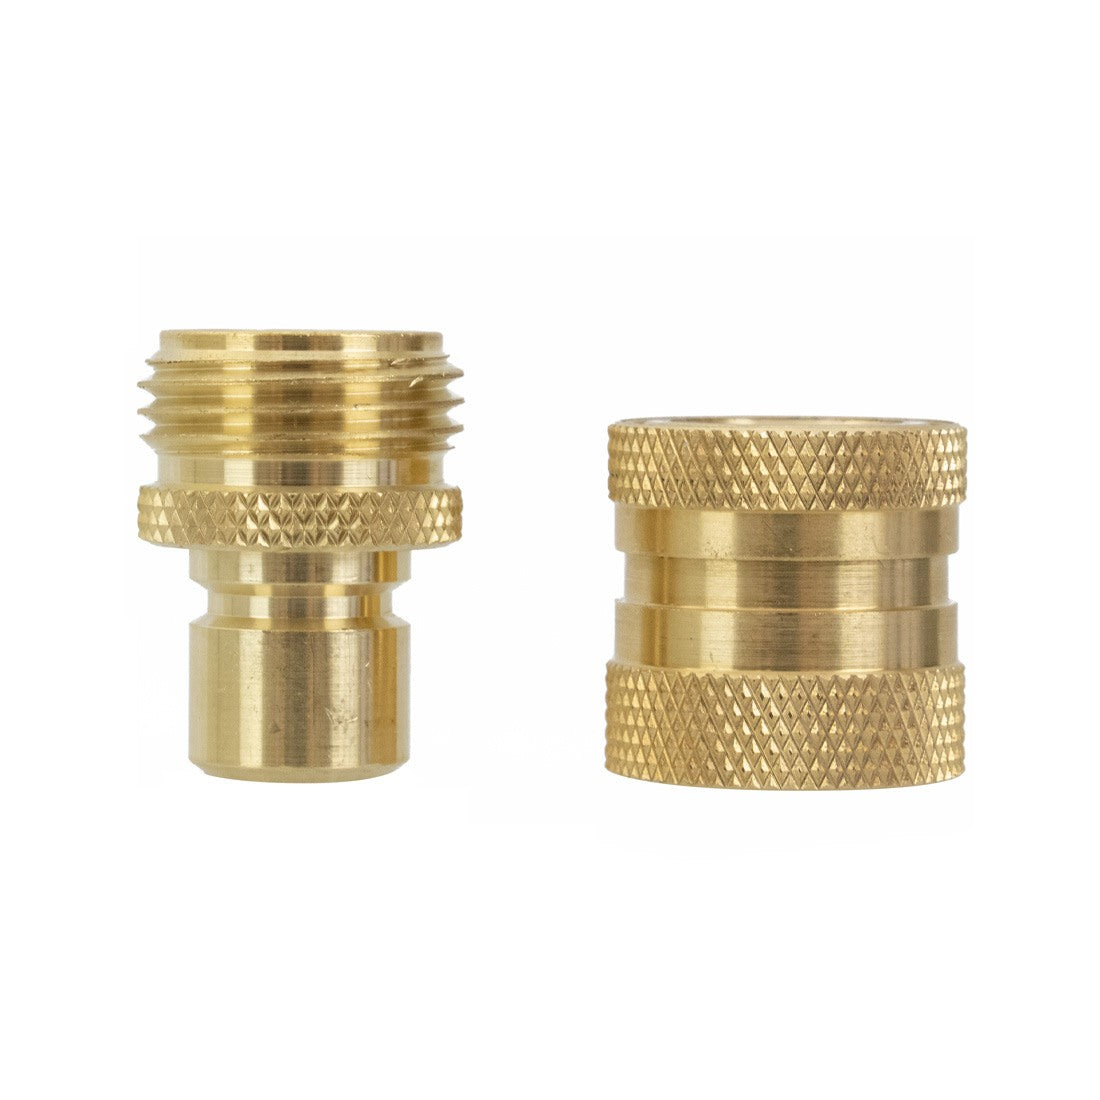 Garden Hose Quick Connect Male and Female Set - Brass - Side-by-Side Font View